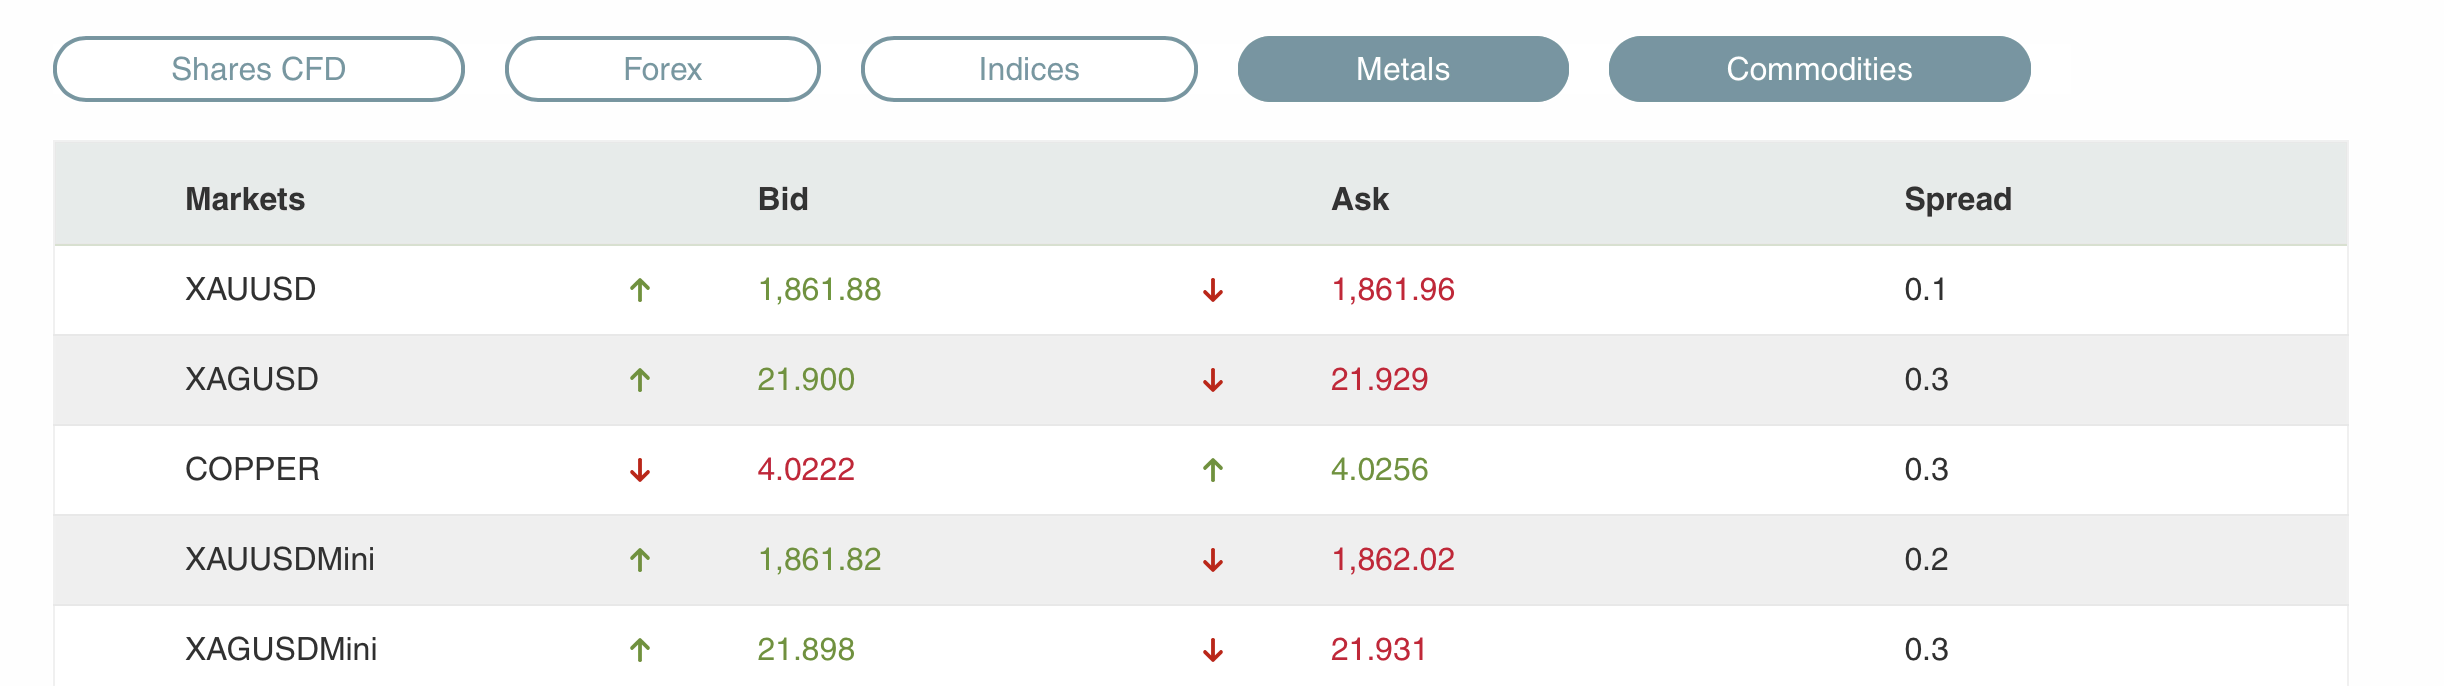 Typical spreads for metals on Think Markets